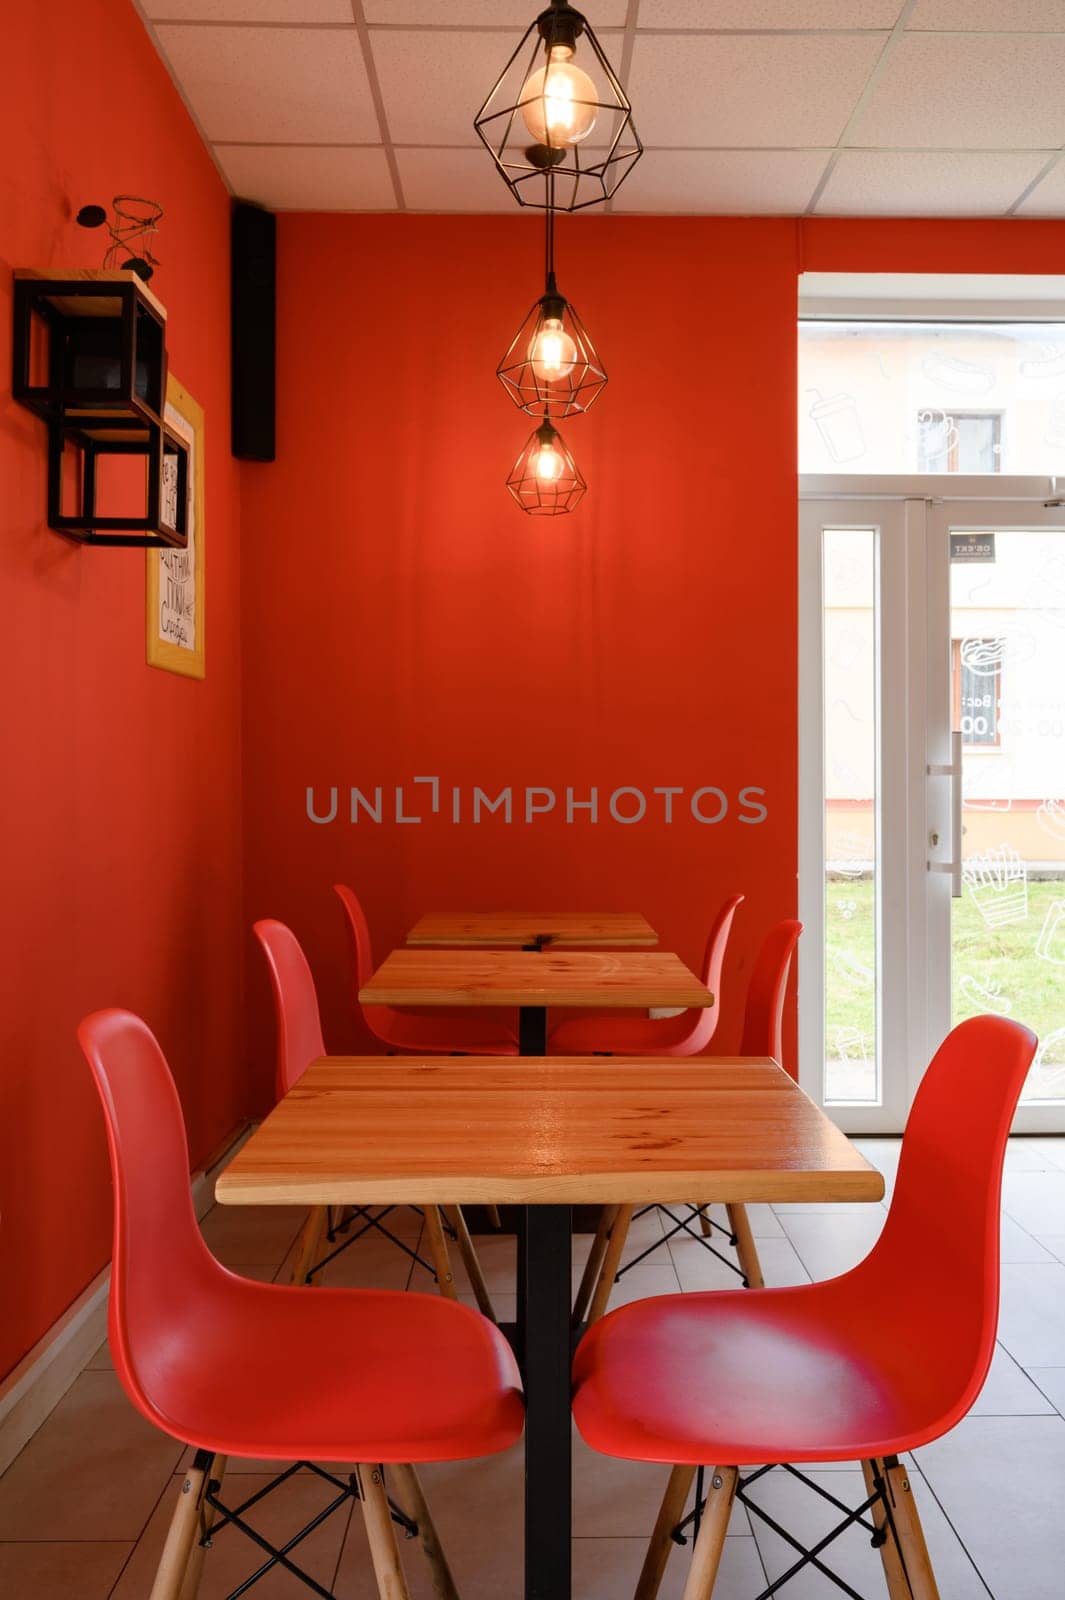 Ivano-Frankivsk, Ukraine March 26, 2023: Interior of a fast food establishment or cafe, red interior in a cafe.